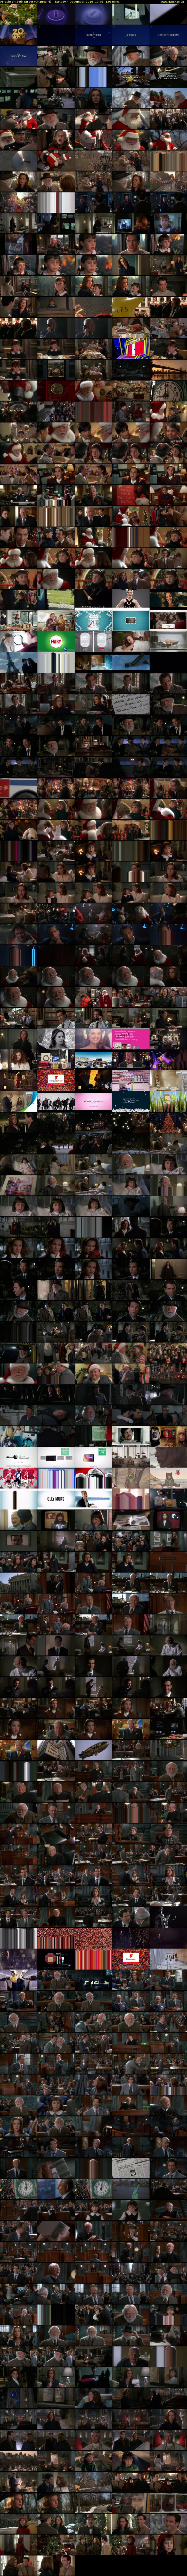 Miracle on 34th Street (Channel 4) Sunday 4 December 2016 17:35 - 19:35